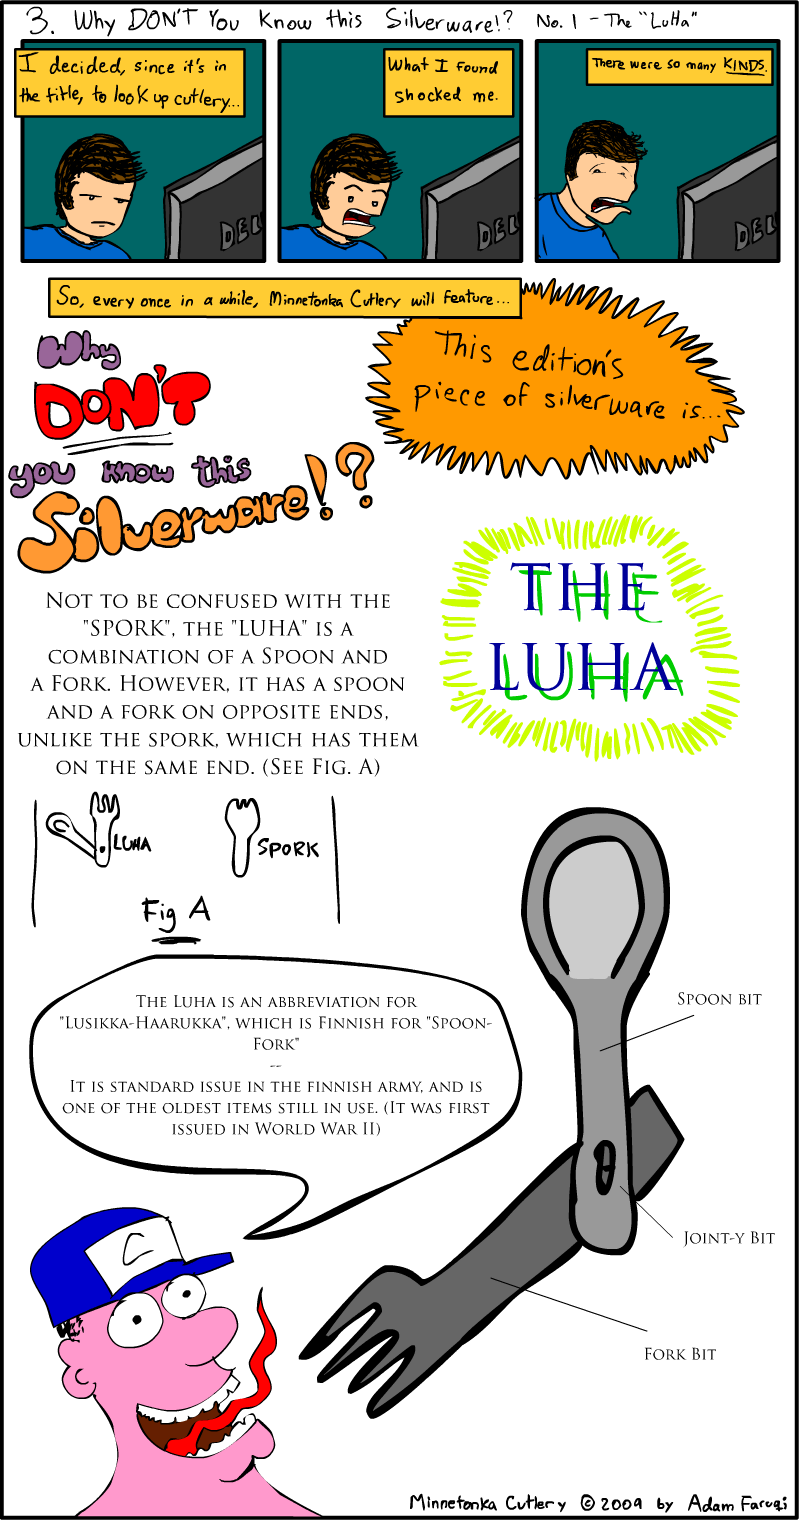 3. Why DON'T You Know This Silverware!? No. 1 -- The "Luha"